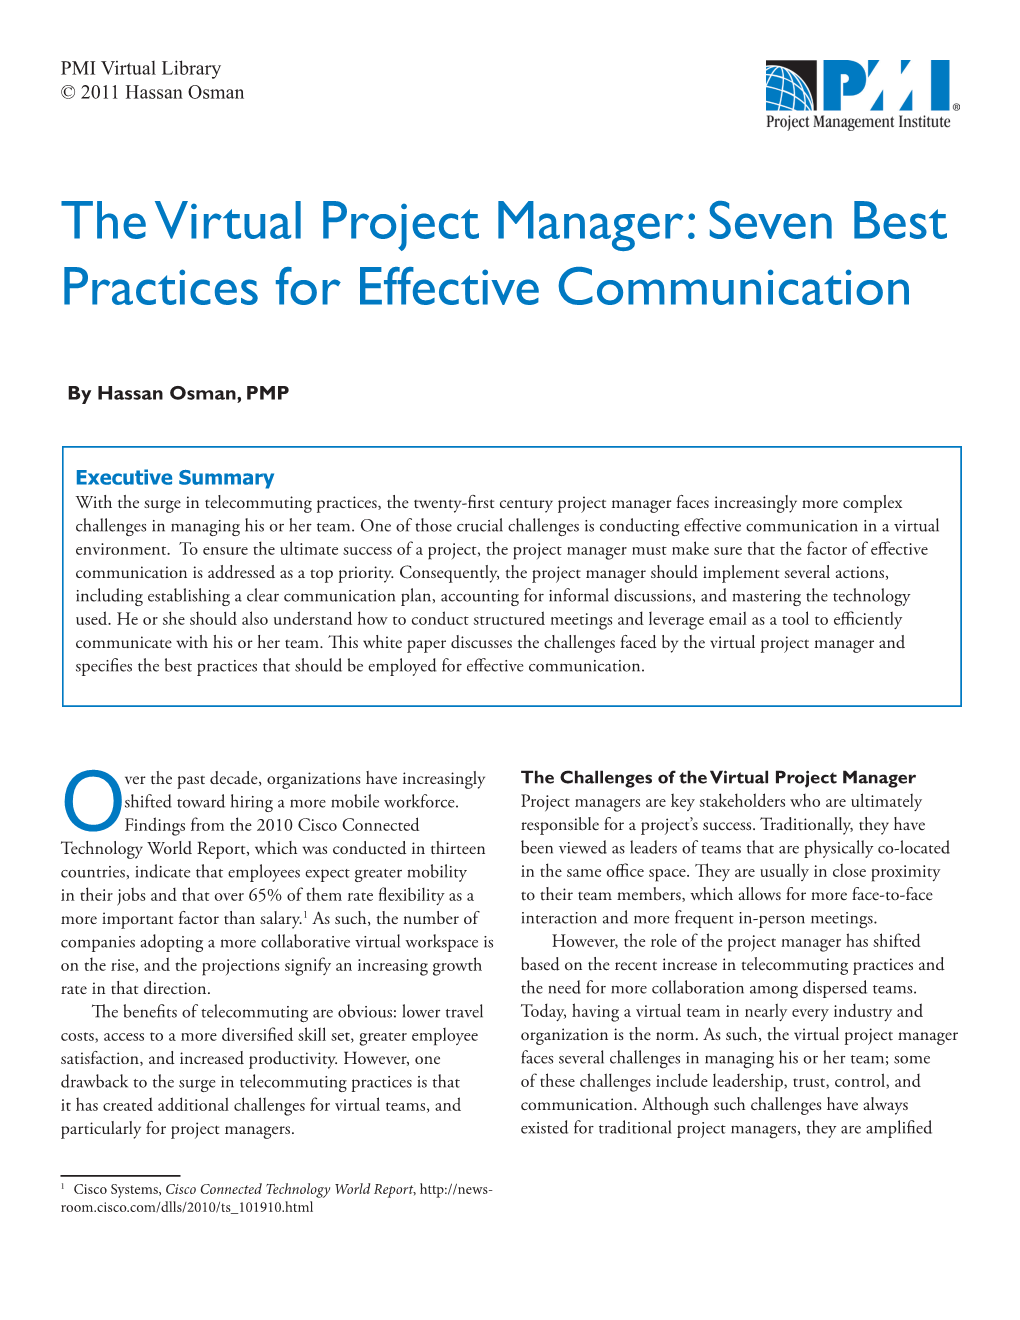 The Virtual Project Manager: Seven Best Practices for Effective Communication